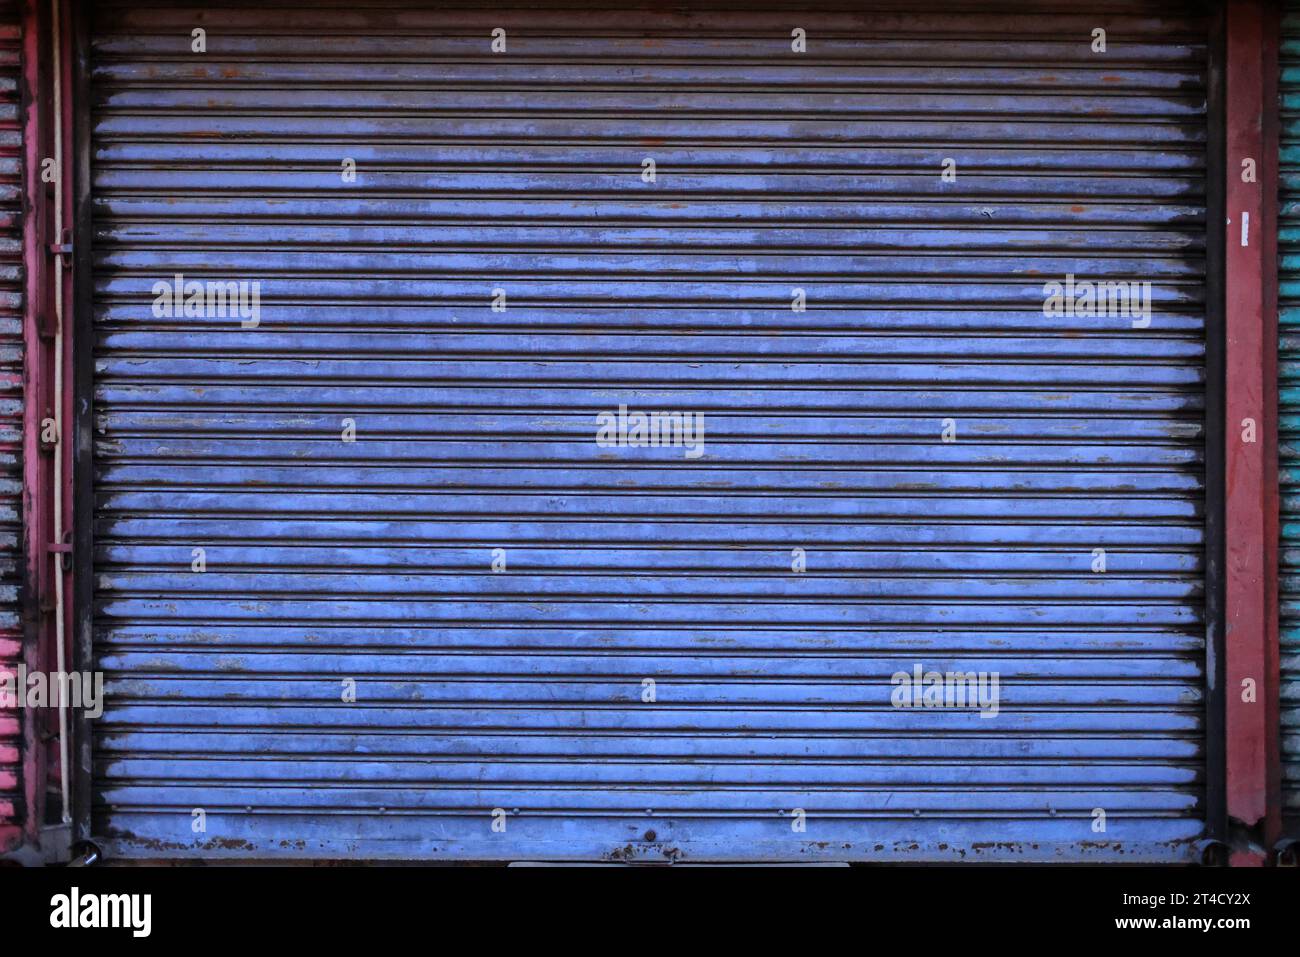 A close-up of a vibrantly colored, yet aged and rust-streaked metal shutter, capturing the essence of urban wear and tear. Stock Photo